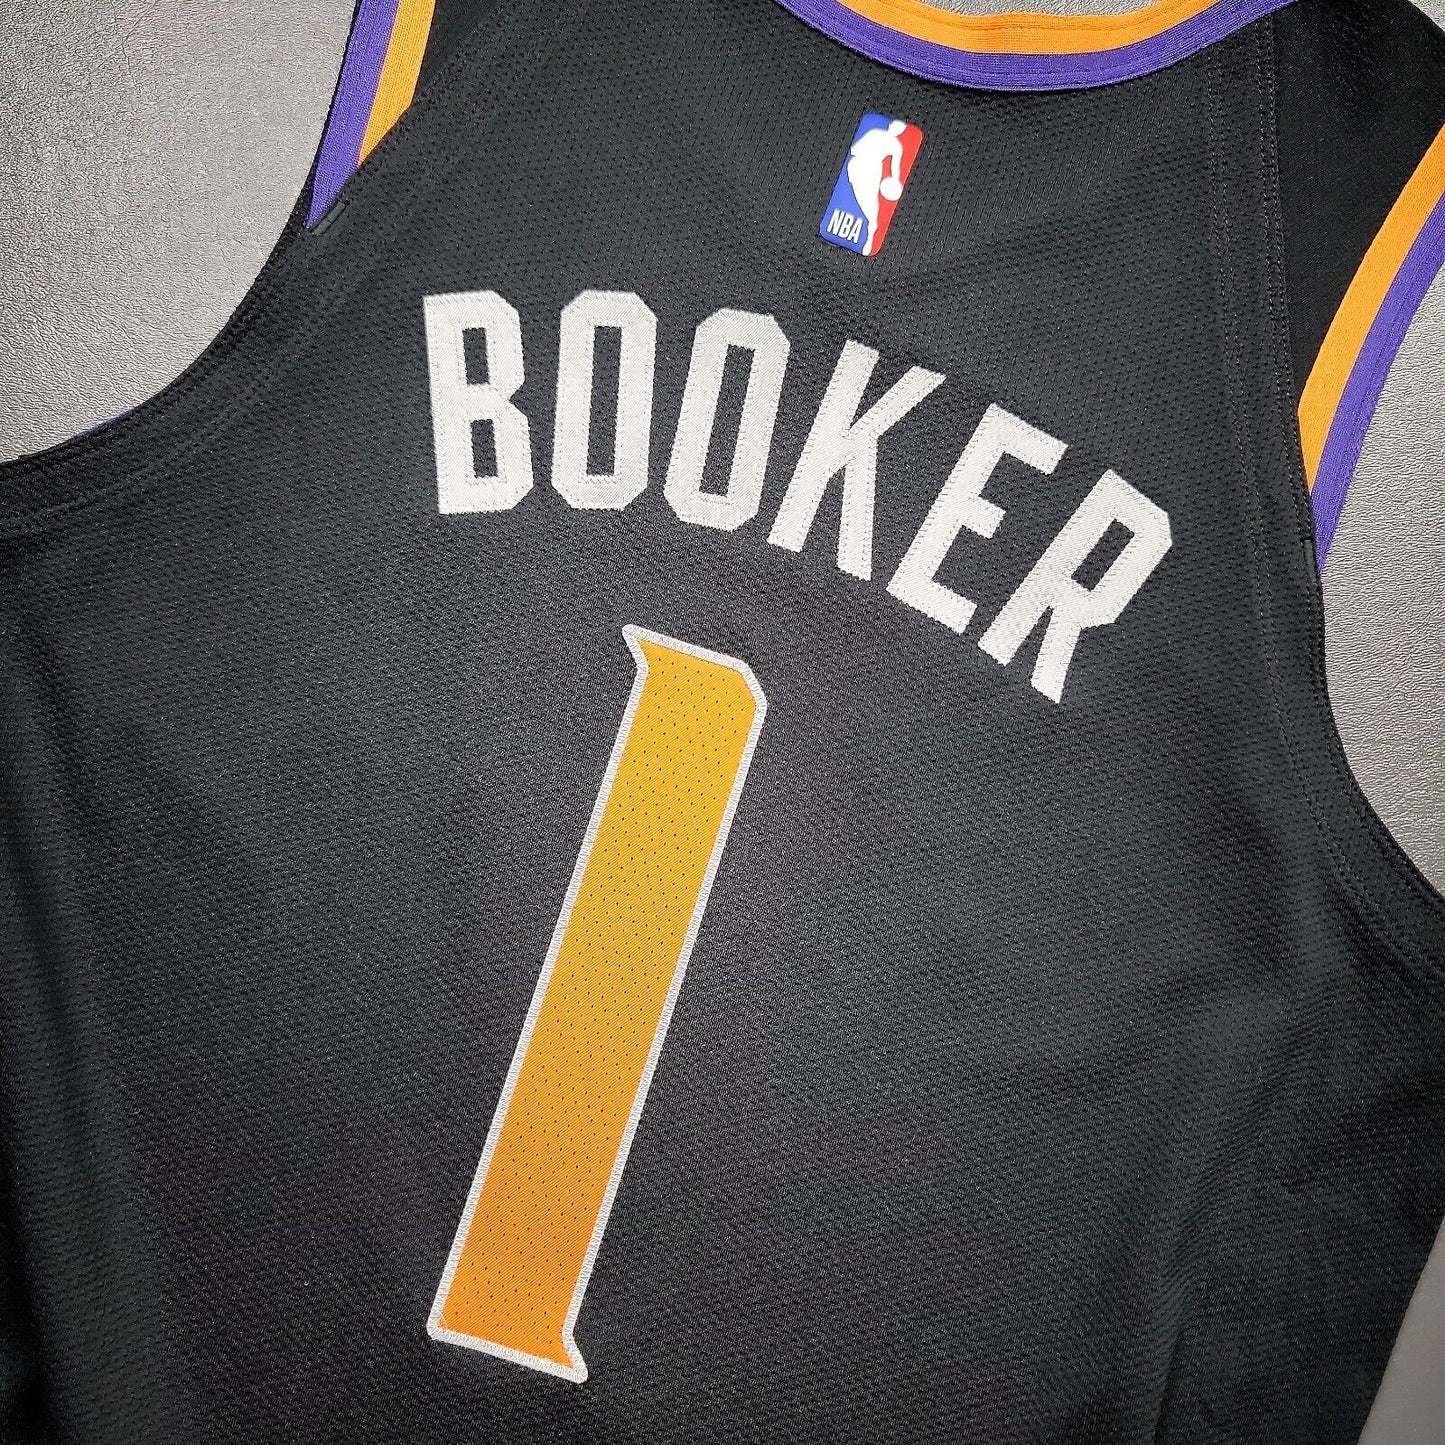 100% Authentic Devin Booker Nike 2019 Phoenix Suns Team Issued Pro Jersey 46+6"